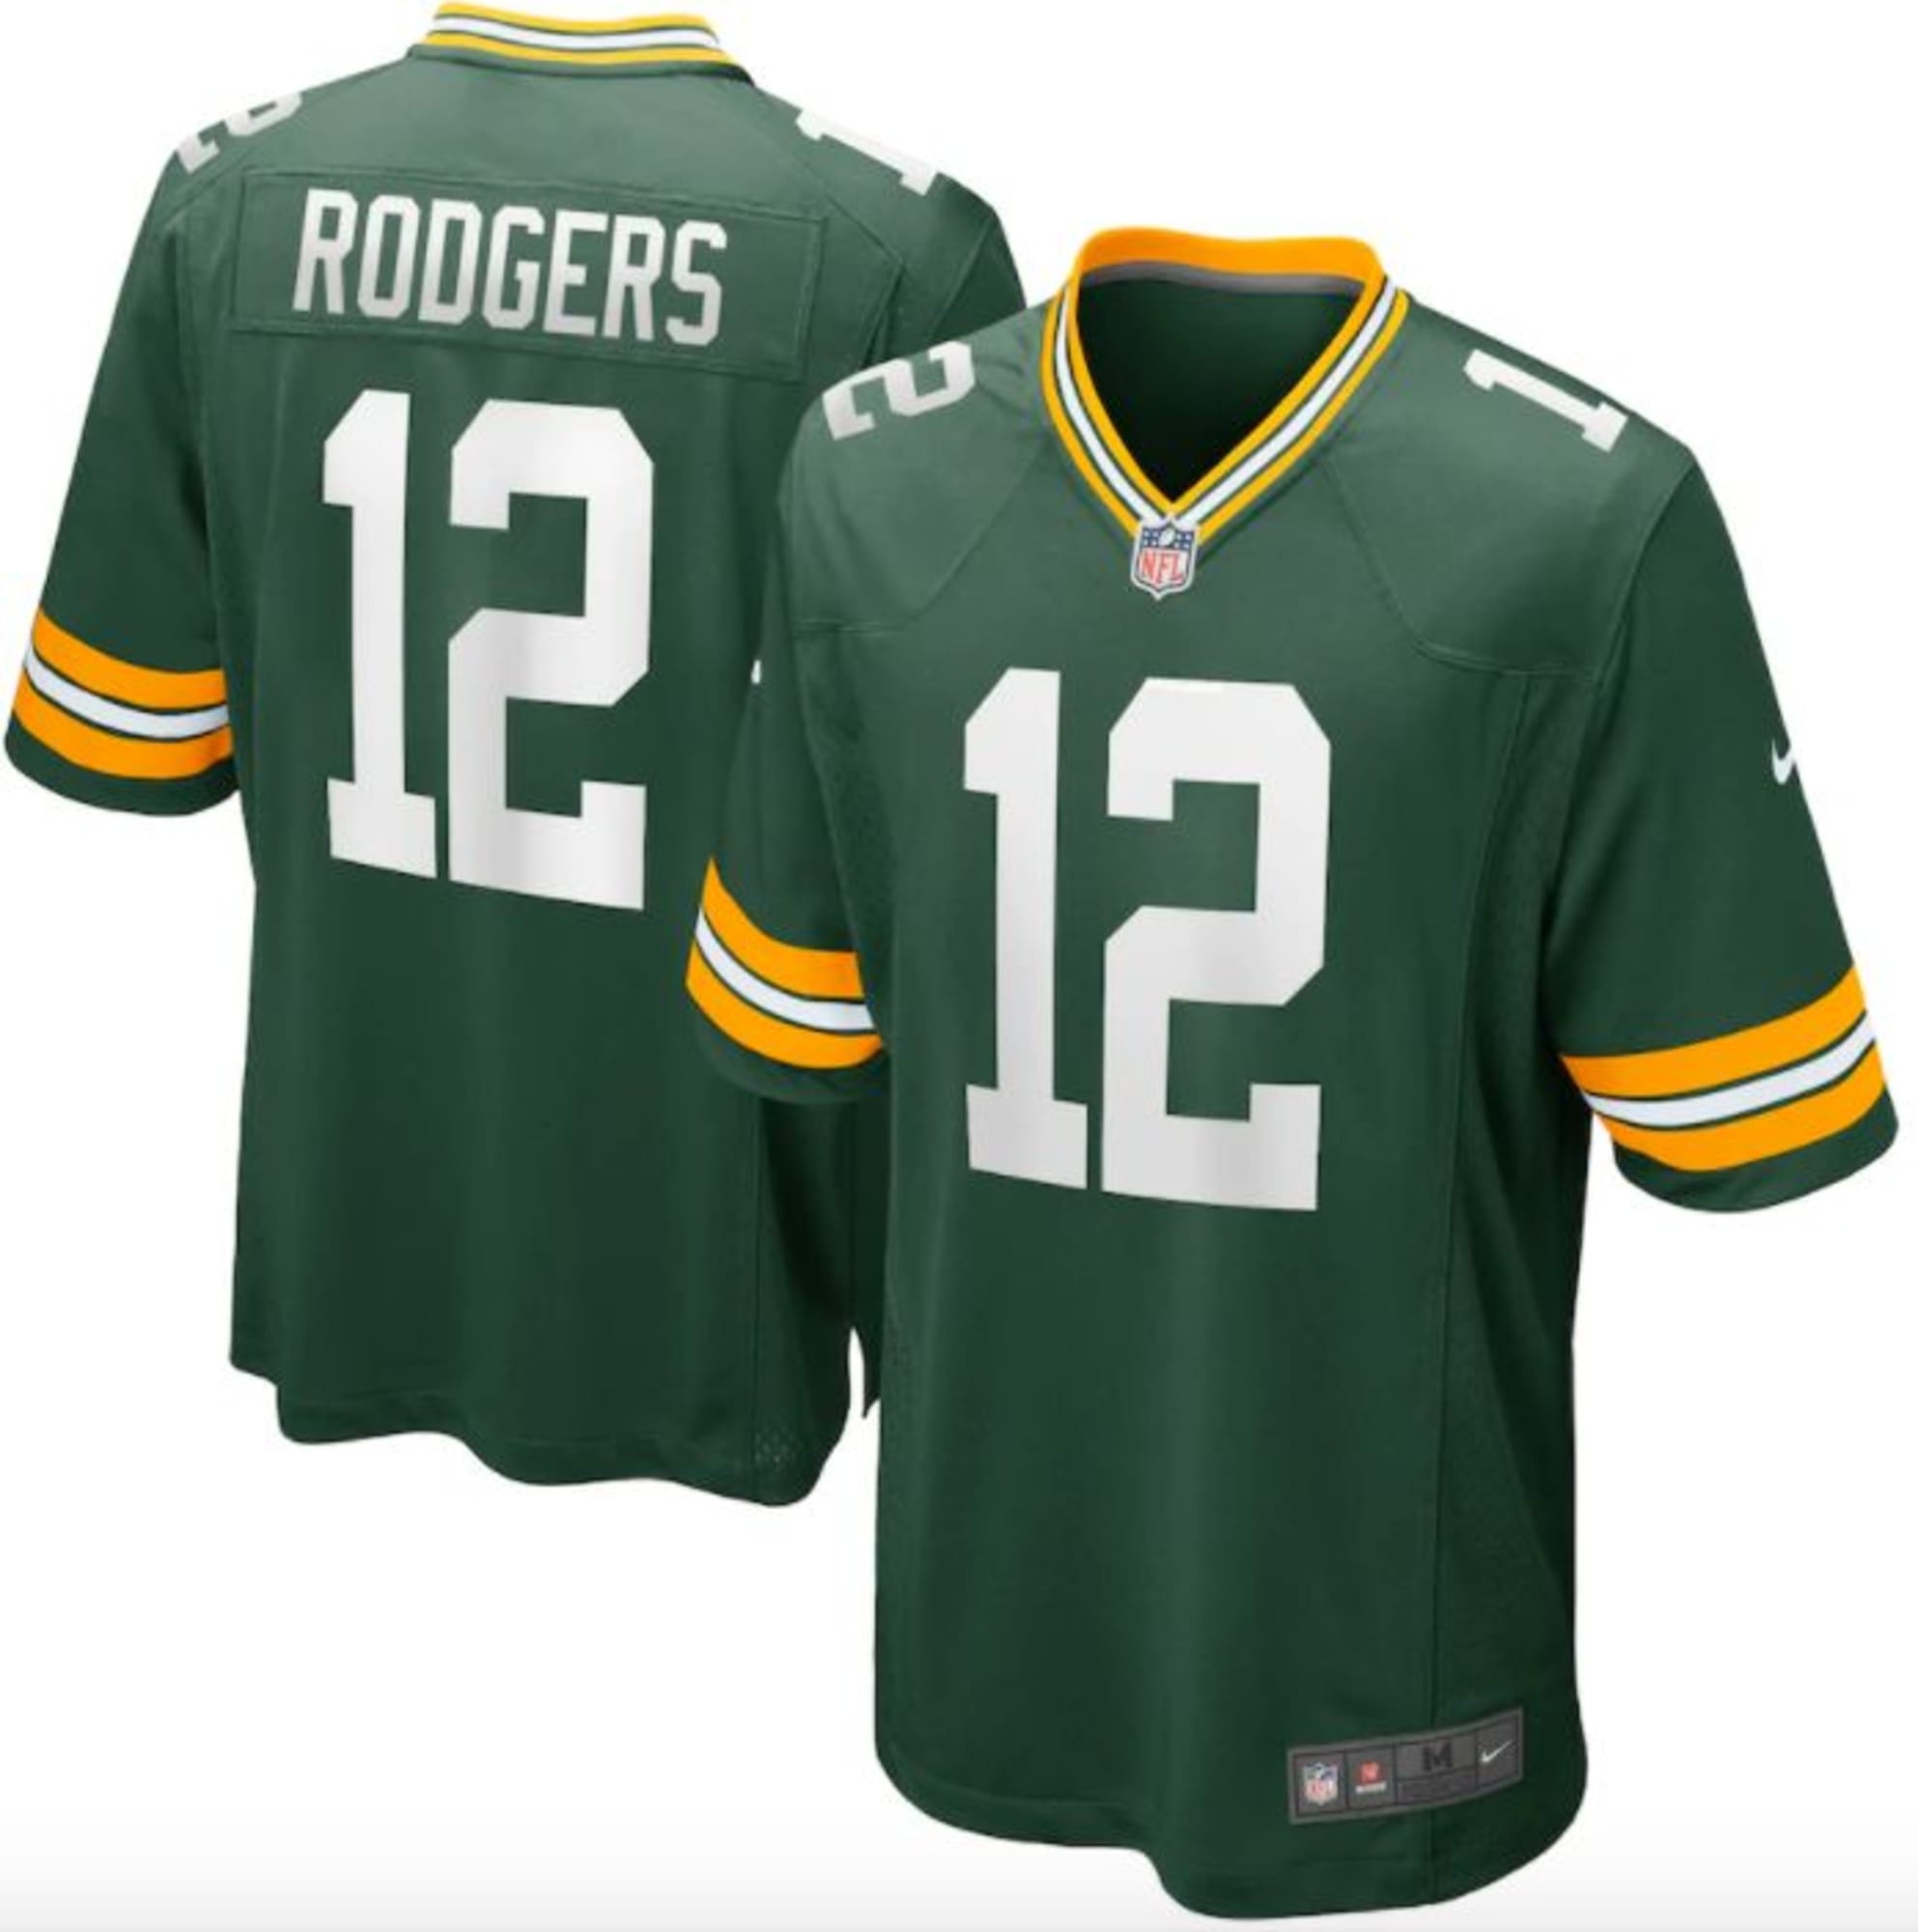 Wisconsin Products Every Cheesehead Needs From Fanatics